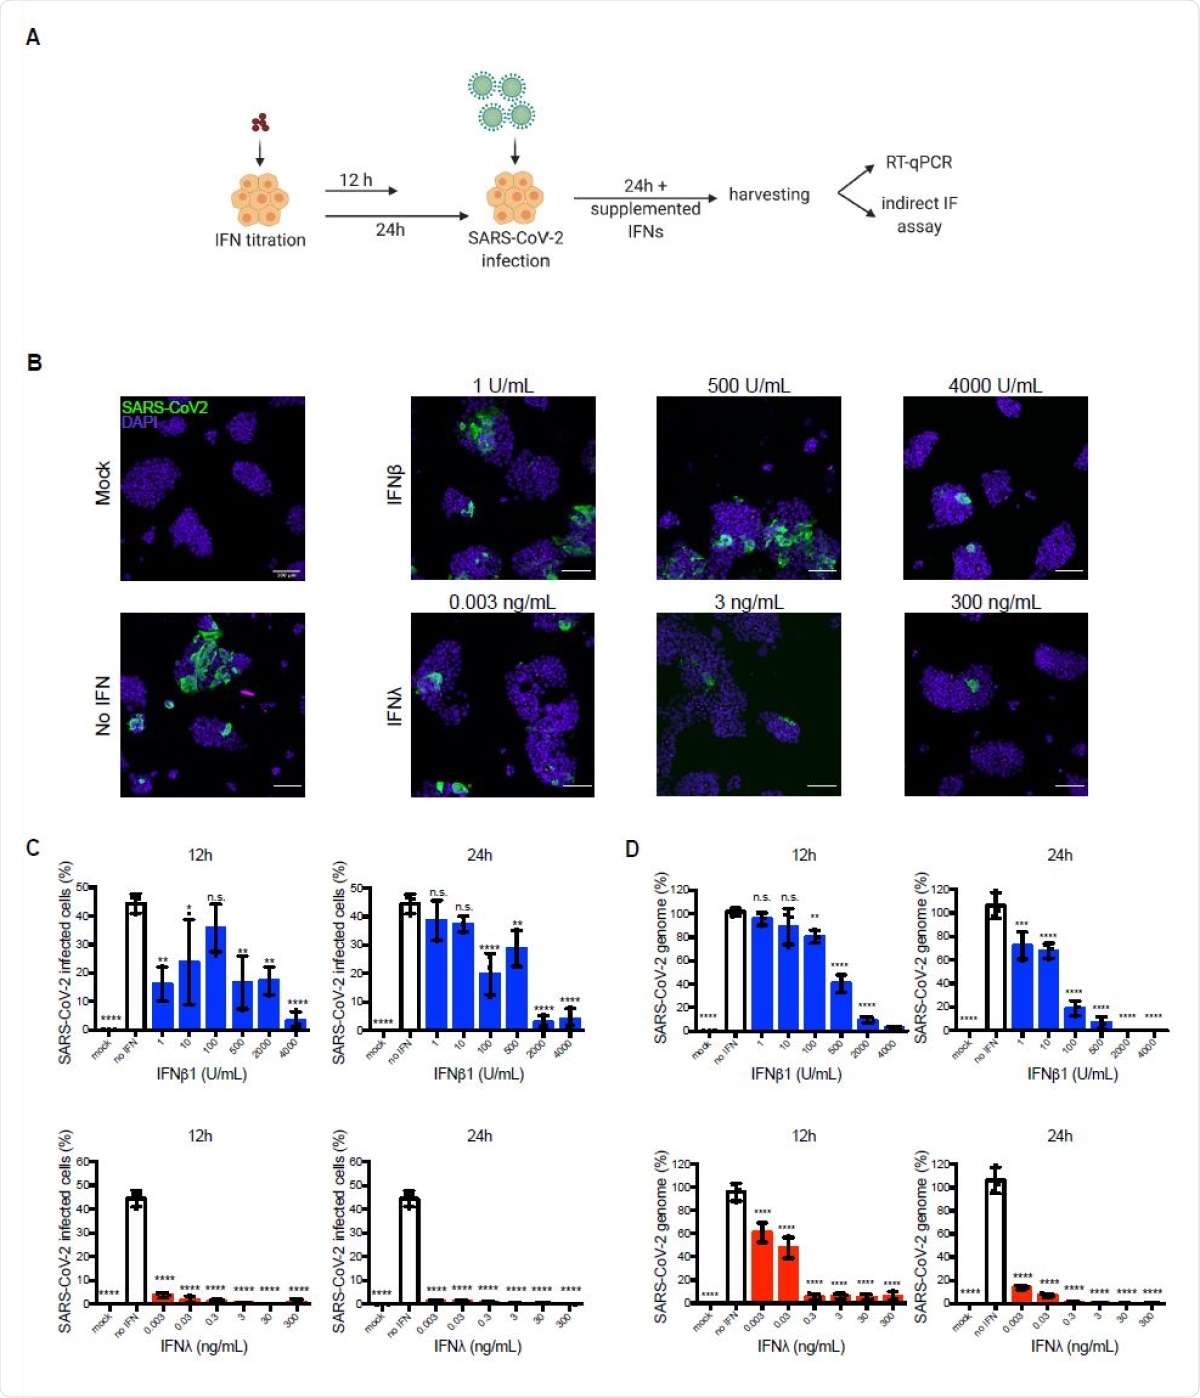 Exogenously added type I and III IFNs inhibit SARS-CoV-2 infection of hIECs in a concentration dependent manner. (A-D) WT T84 cells were mock-treated or pretreated with increasing concentration of type I (IFNβ1) and type III (IFNλ1/2/3) IFNs for 12 h and 24 h prior to infection. Cells were infected with SARS-CoV-2 using a MOI of 0.04. 24 hpi, cells were harvested to assay virus infection and replication. (A) Schematic of infection conditions. (B) Cells were fixed and indirect immunofluorescence was performed against the viral nucleocapsid (green). Nuclei were stained with DAPI (blue). Representative images are shown. Scale